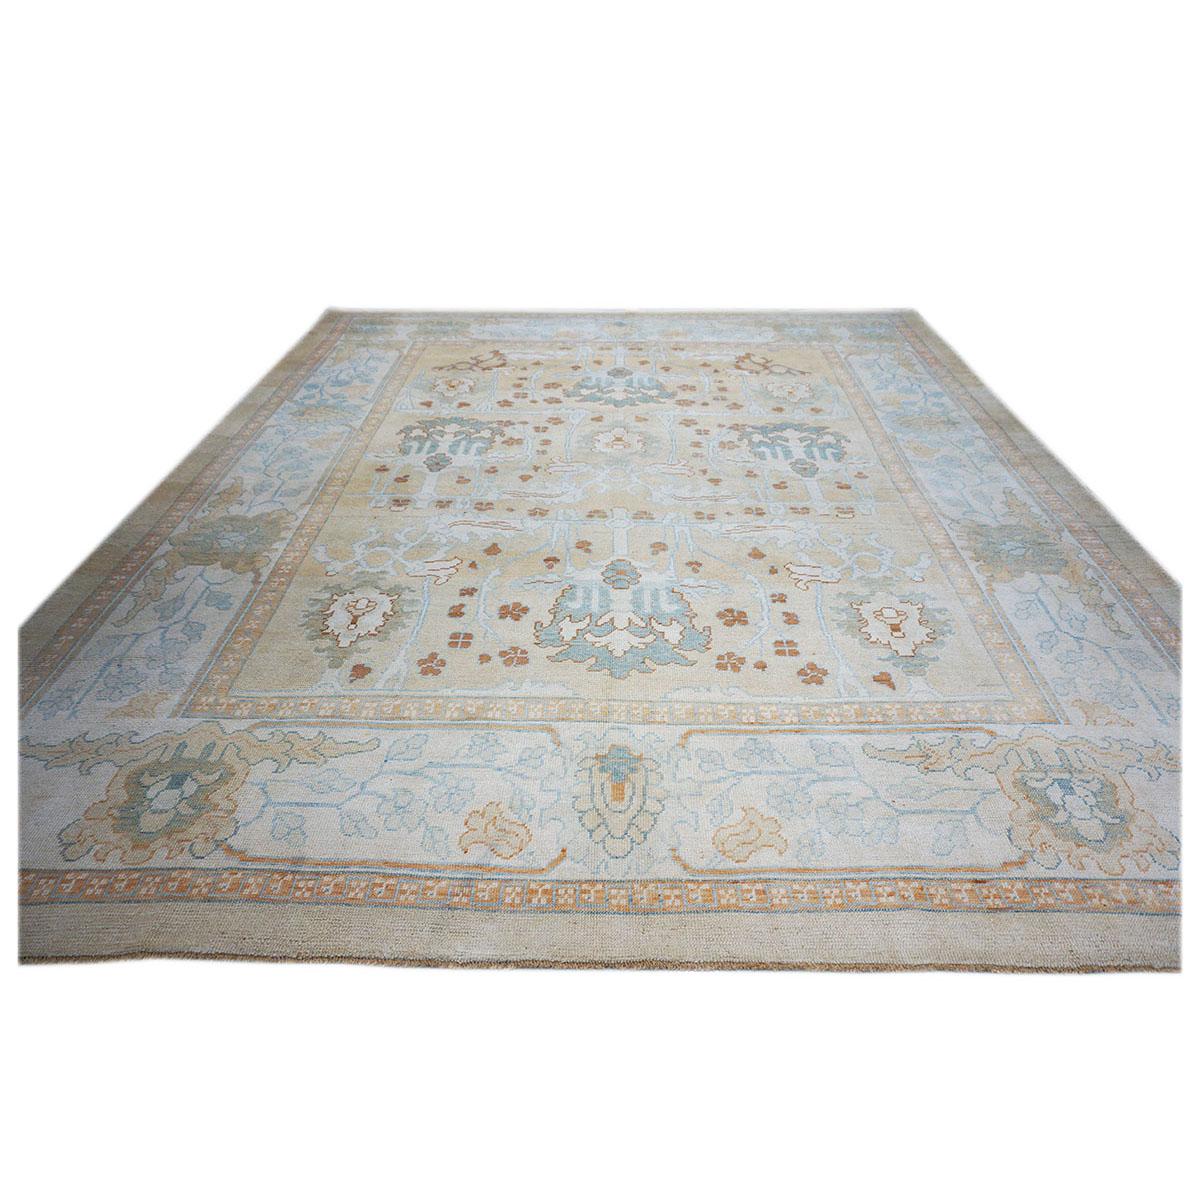 Hand-Woven 21st Century Turkish Donegal Carpet 11x14 Tan, Blue, & Ivory Area Rug For Sale